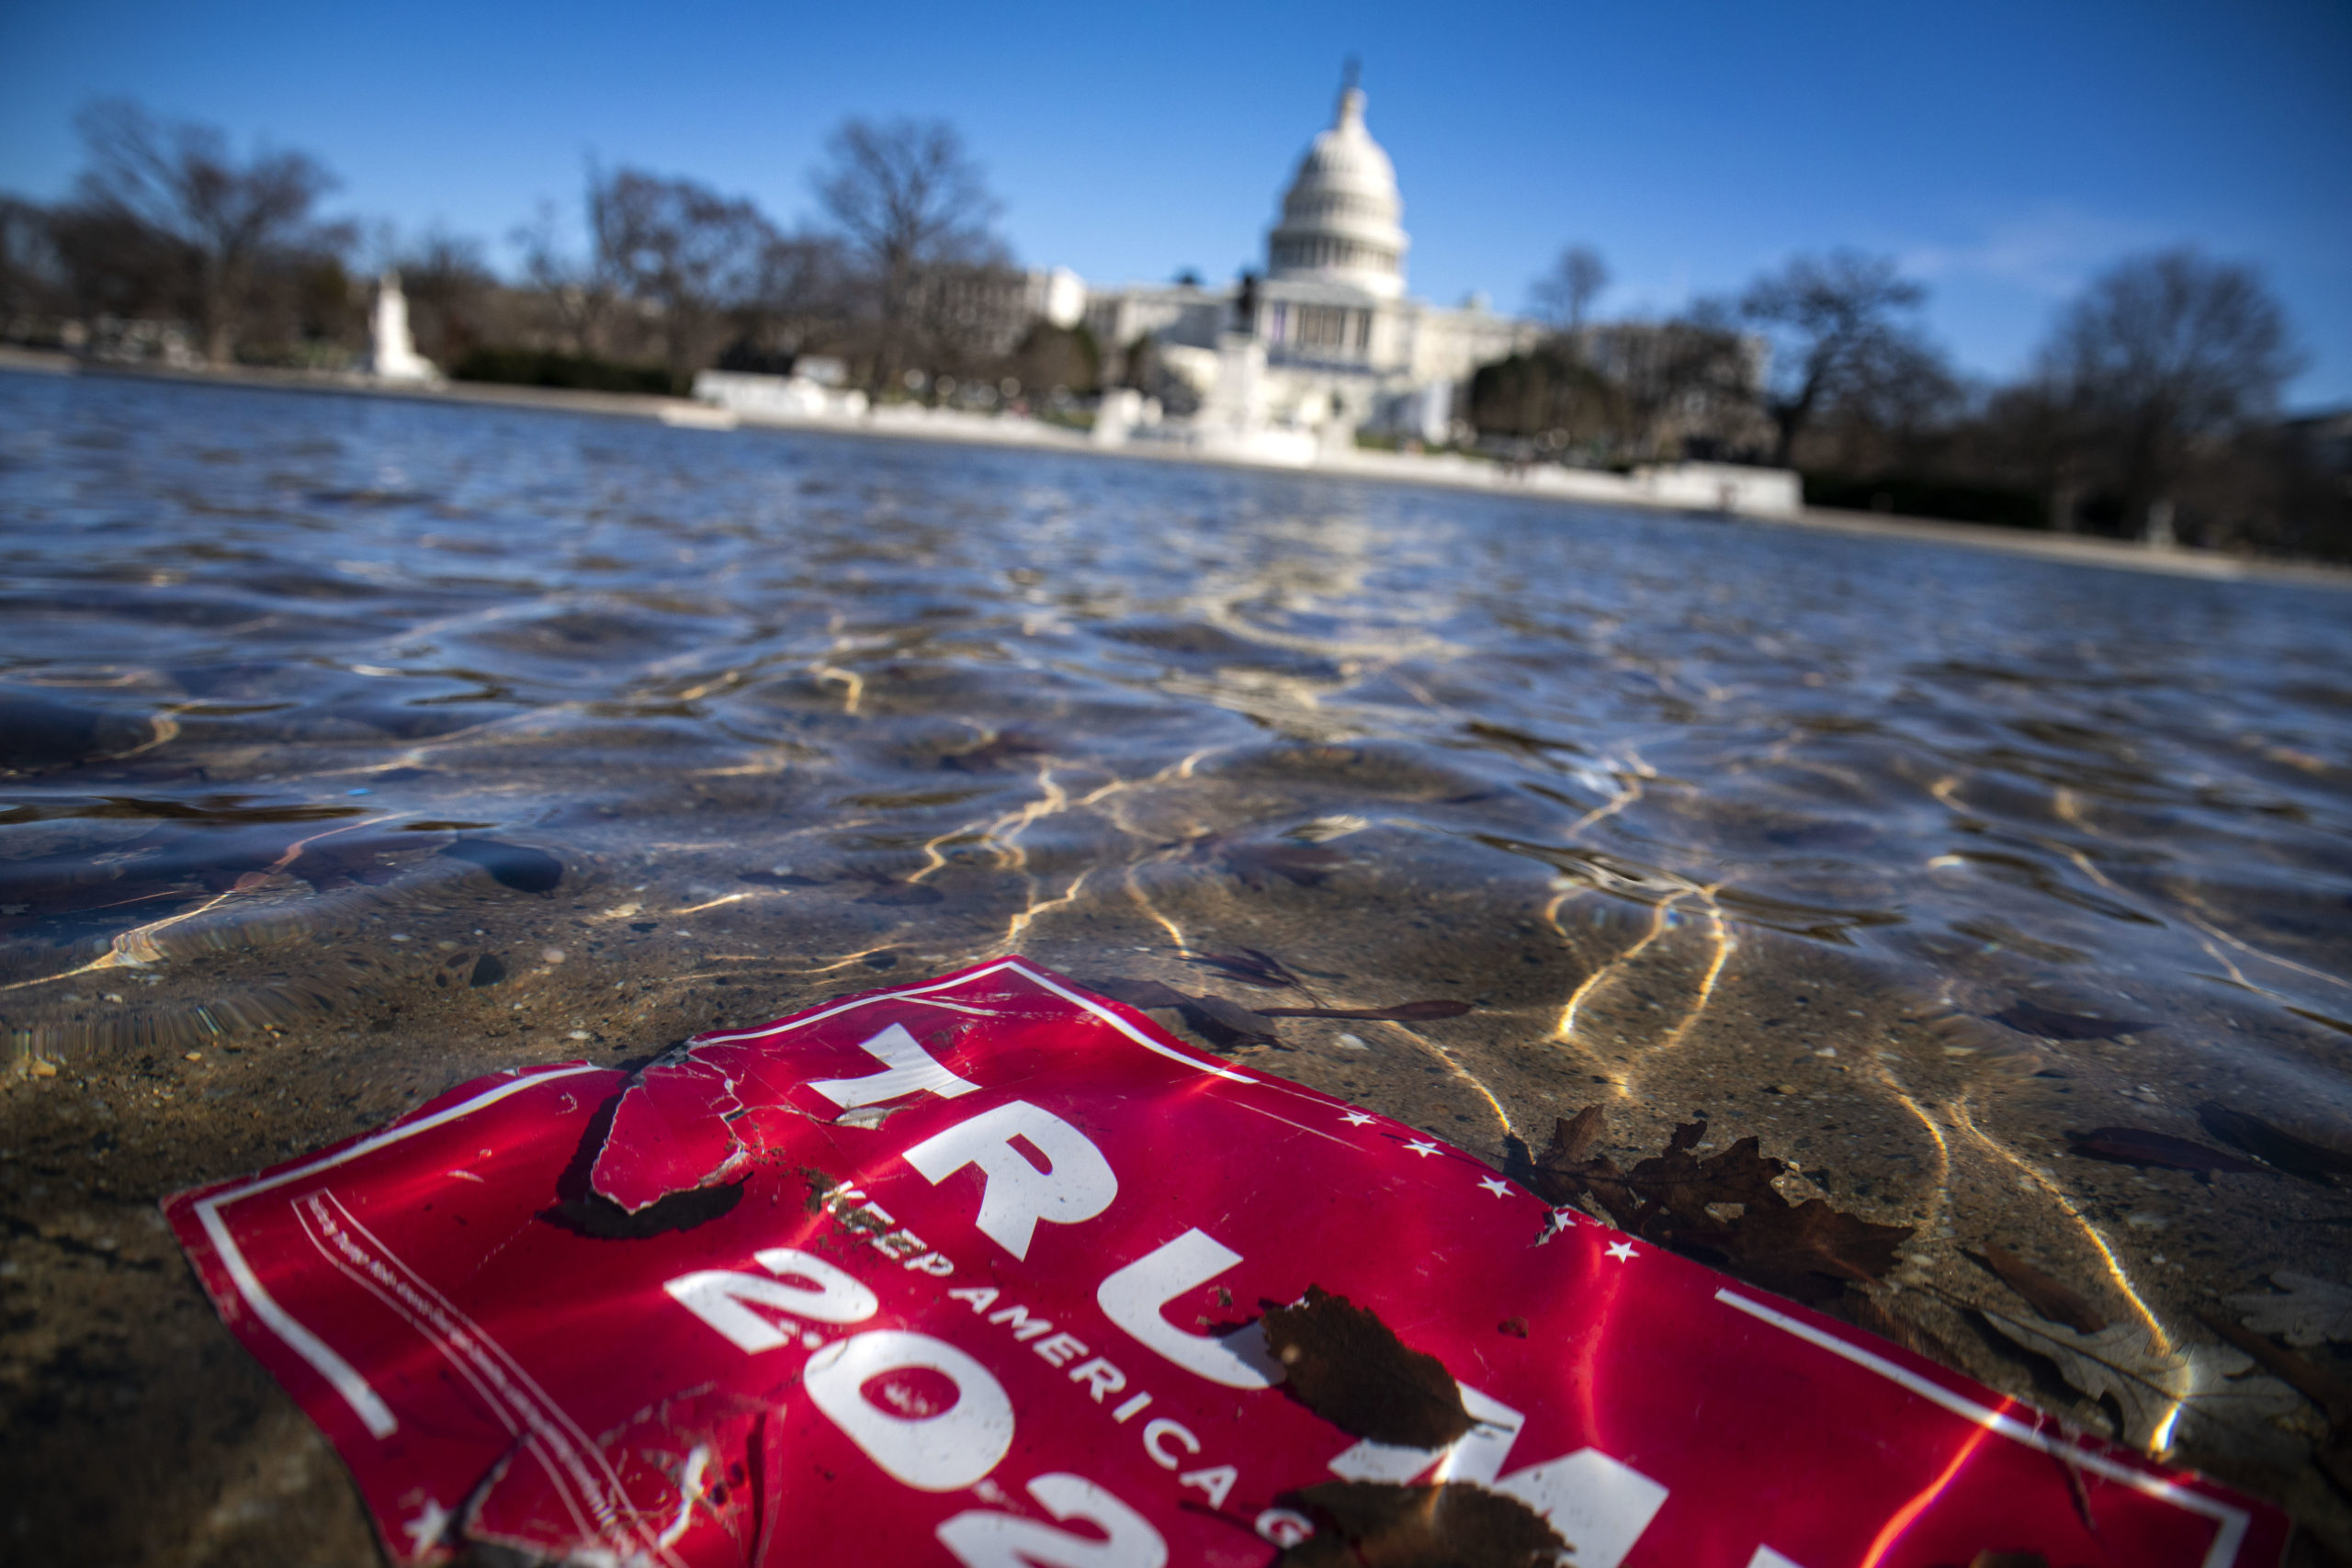 WASHINGTON, DC - JANUARY 09: A campaign sign for U.S. President Donald Trump lies beneath water in the Capitol Reflecting Pool, on Capitol Hill on January 9, 2021 in Washington, DC. A pro-Trump mob stormed and desecrated the U.S. Capitol on January 6 as Congress held a joint session to ratify President-elect Joe Biden's 306-232 Electoral College win over President Donald Trump. (Photo by Al Drago/Getty Images)